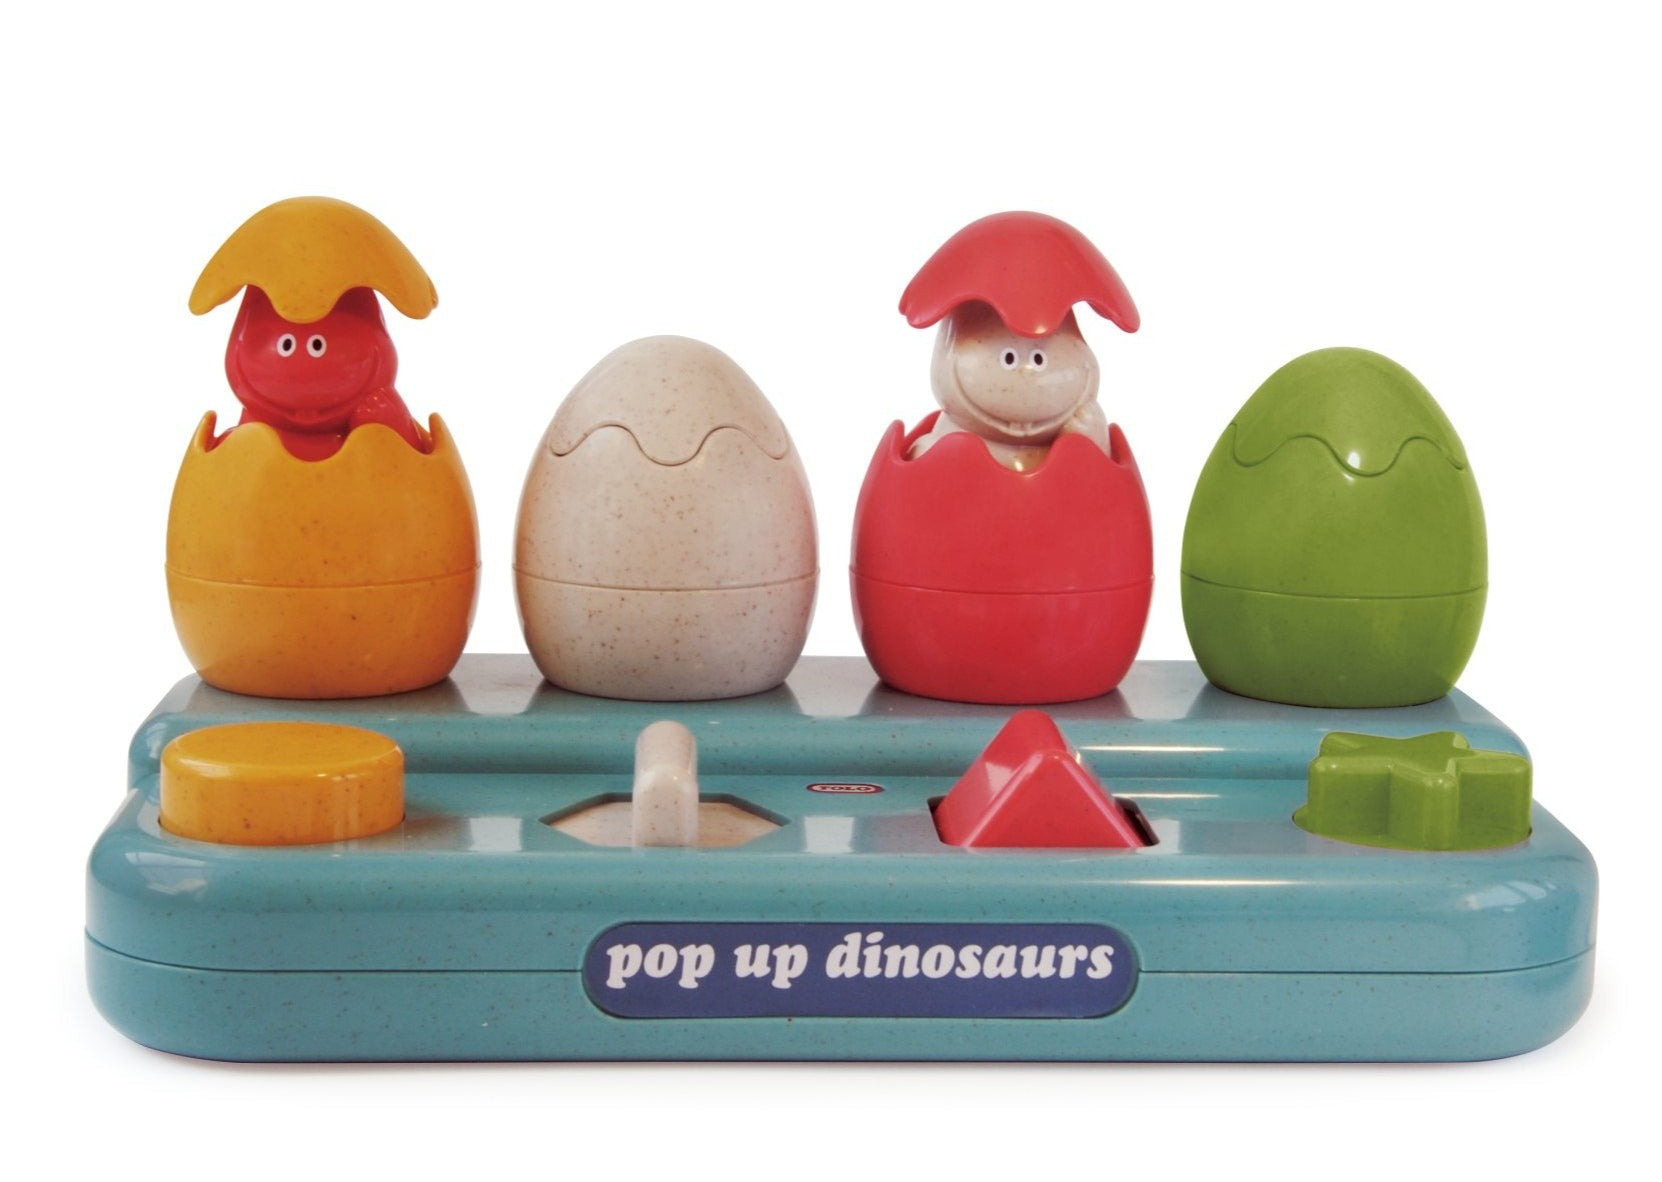 pop up dinosaur toy - angus and dudley